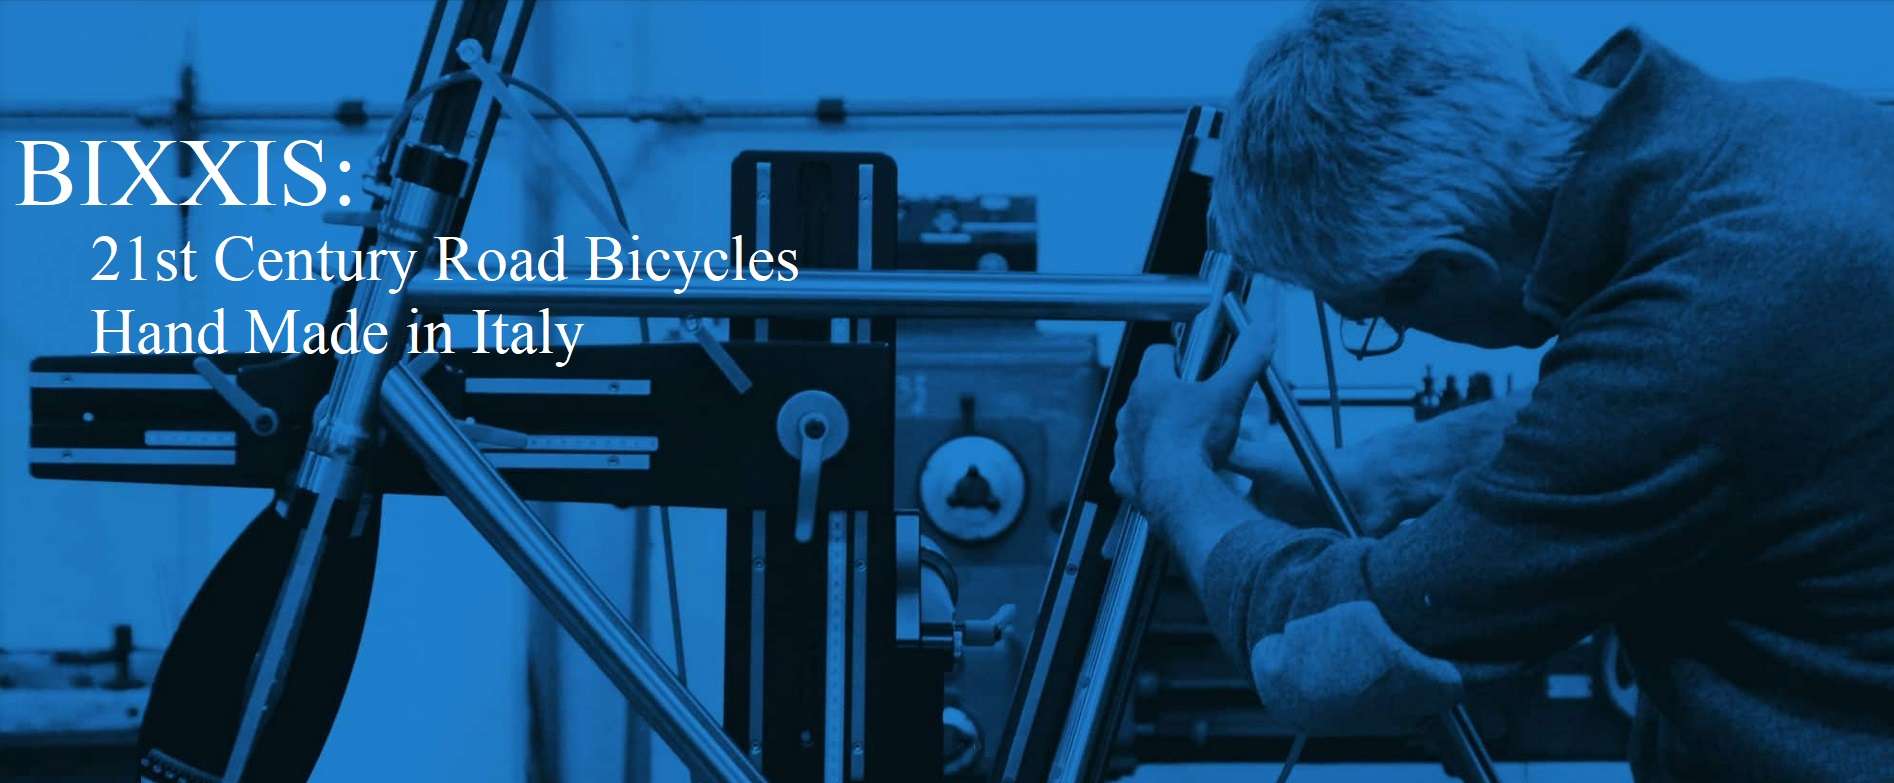 BIXXIS: 21st Century Road Bicycles Hand Made In Italy